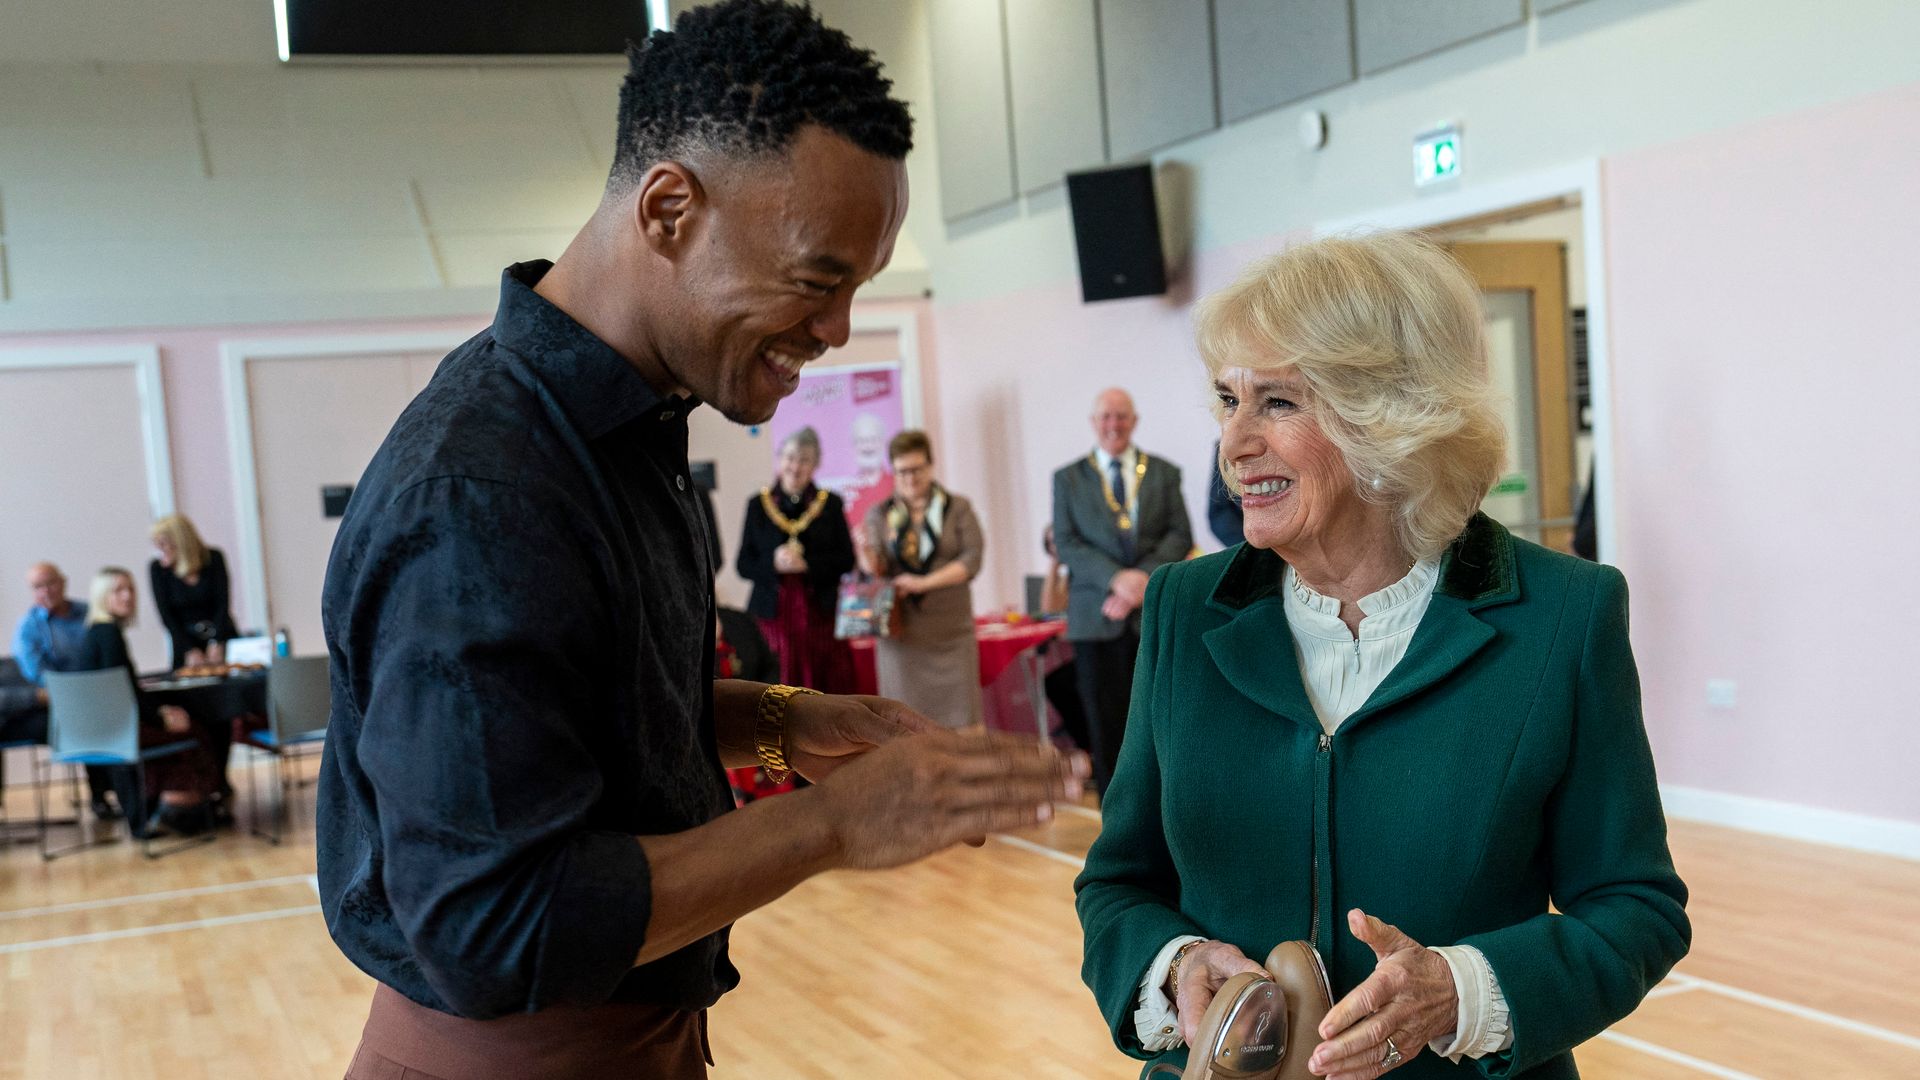 Johannes Radebe gifts Queen Camilla tap shoes